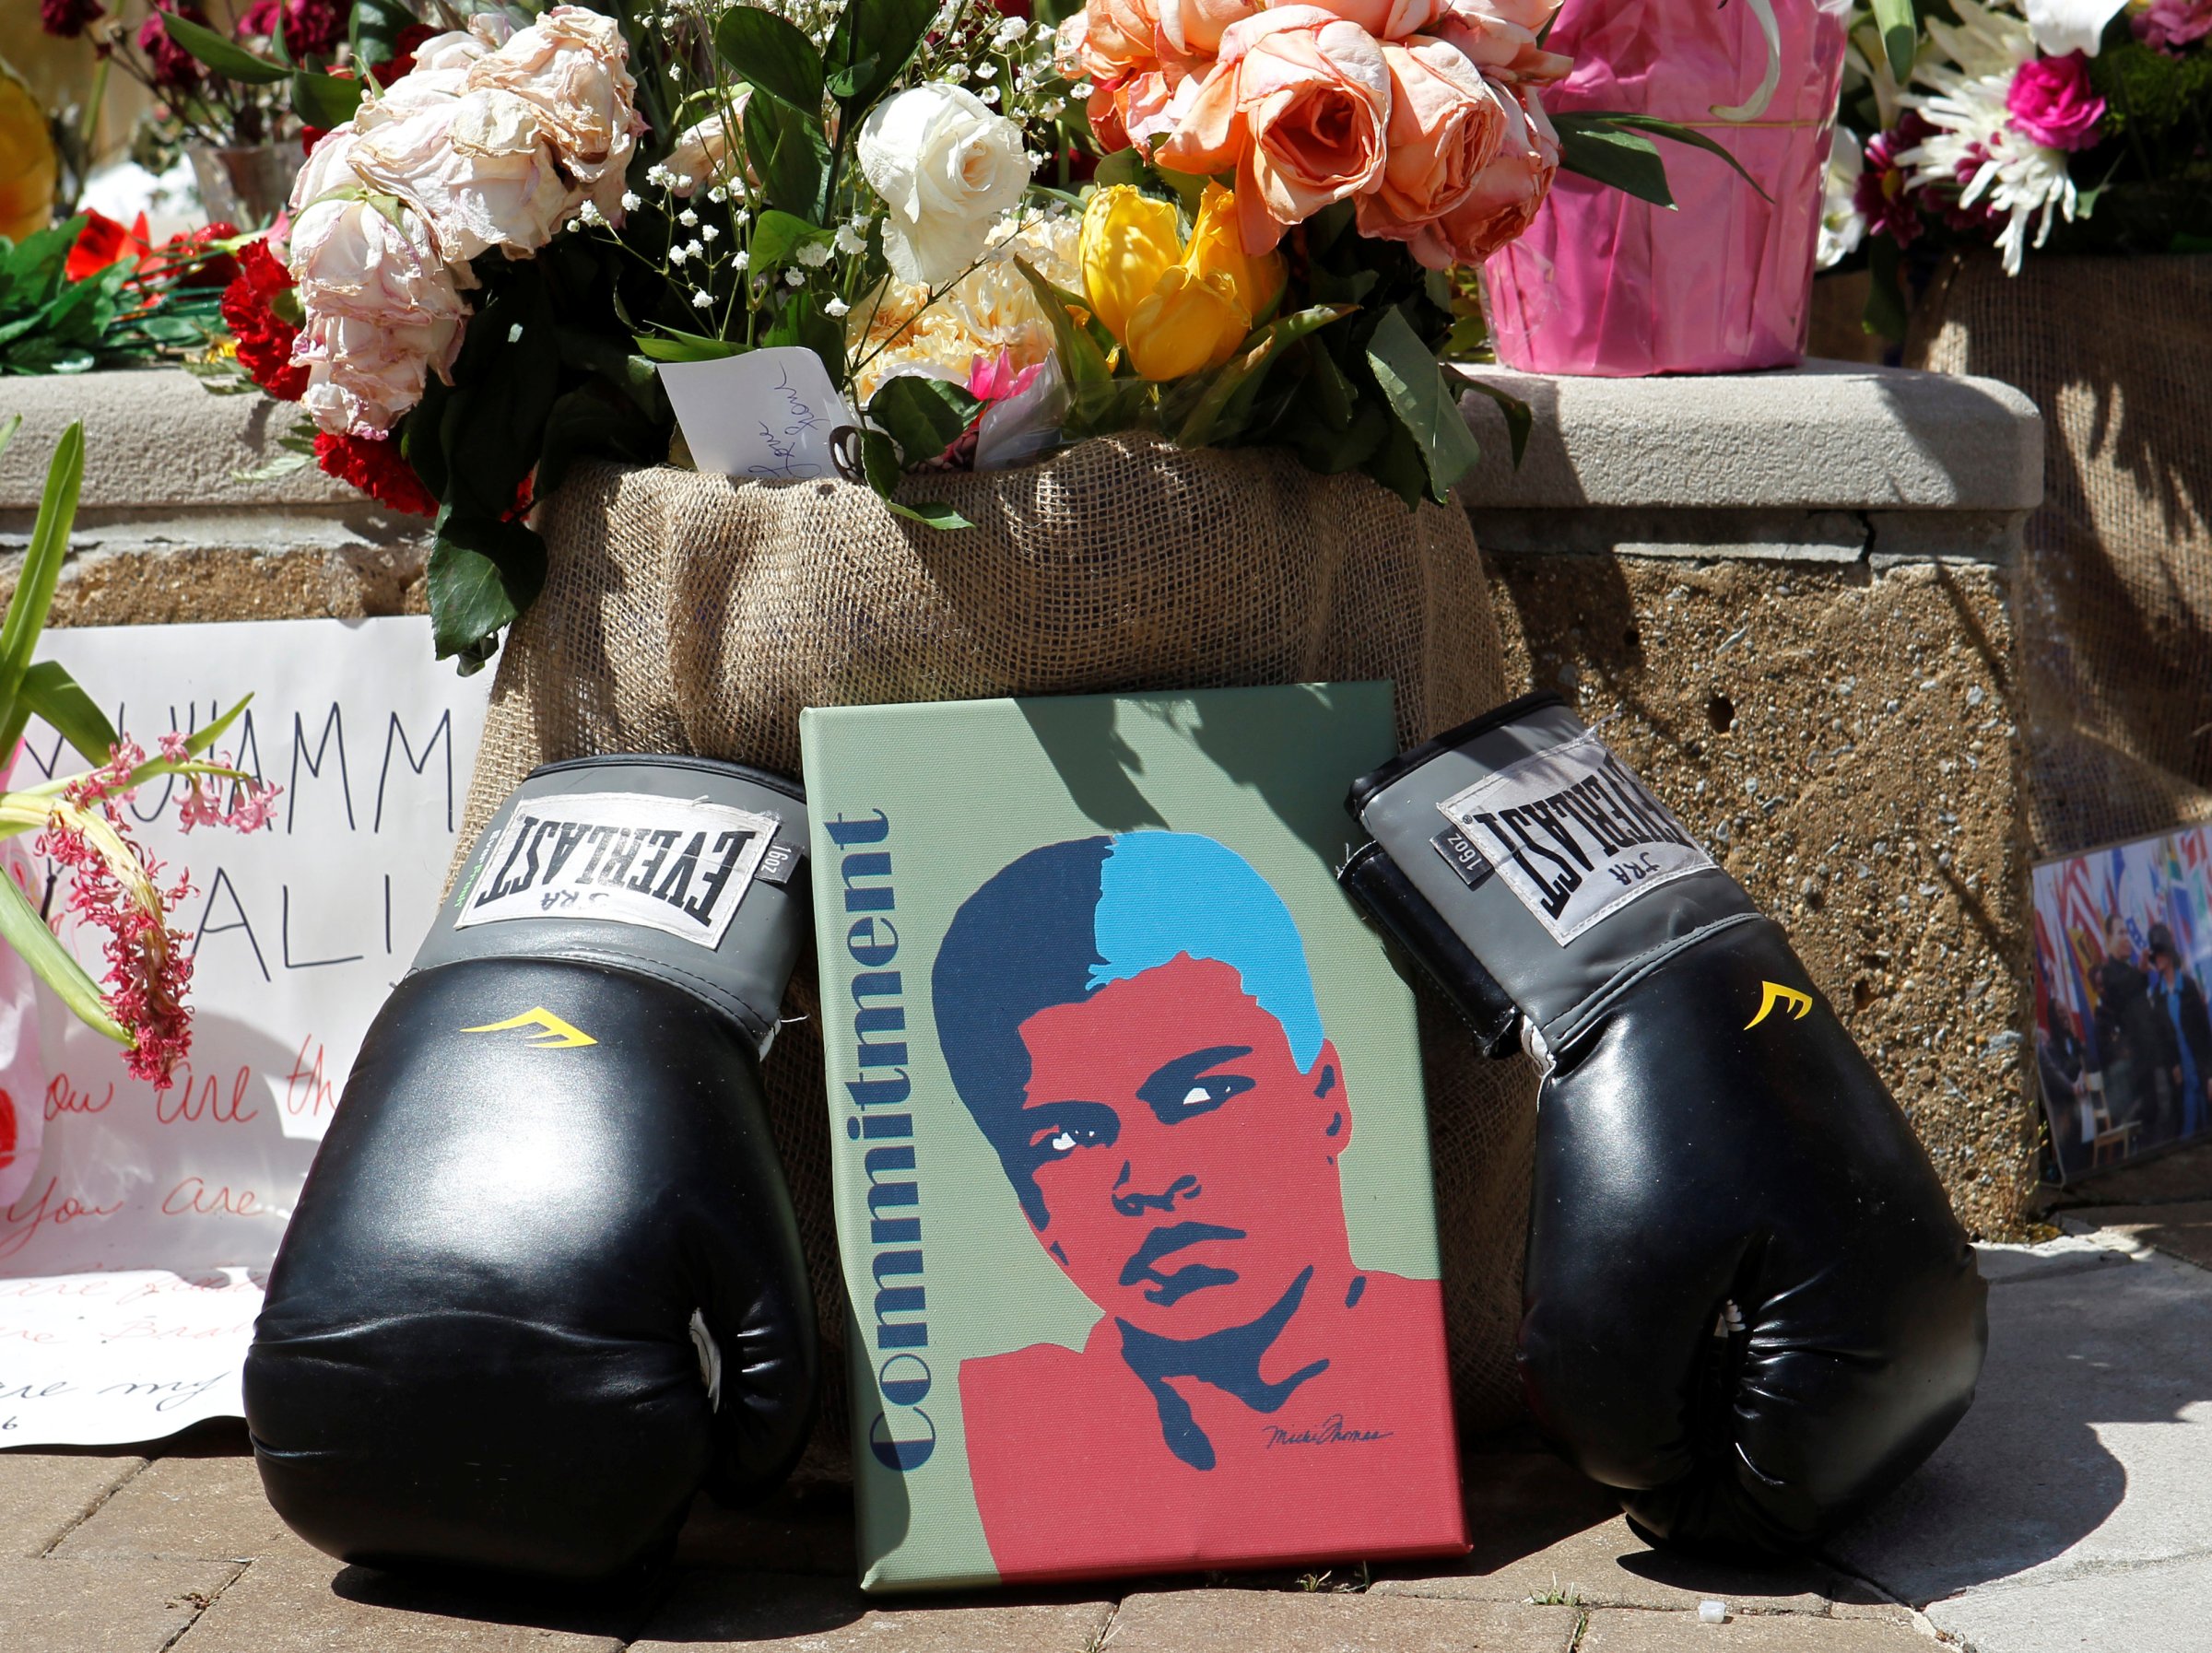 Fans of Muhammad Ali leave pictures and personal mementos as they pay their respects at the Ali Center in Louisville